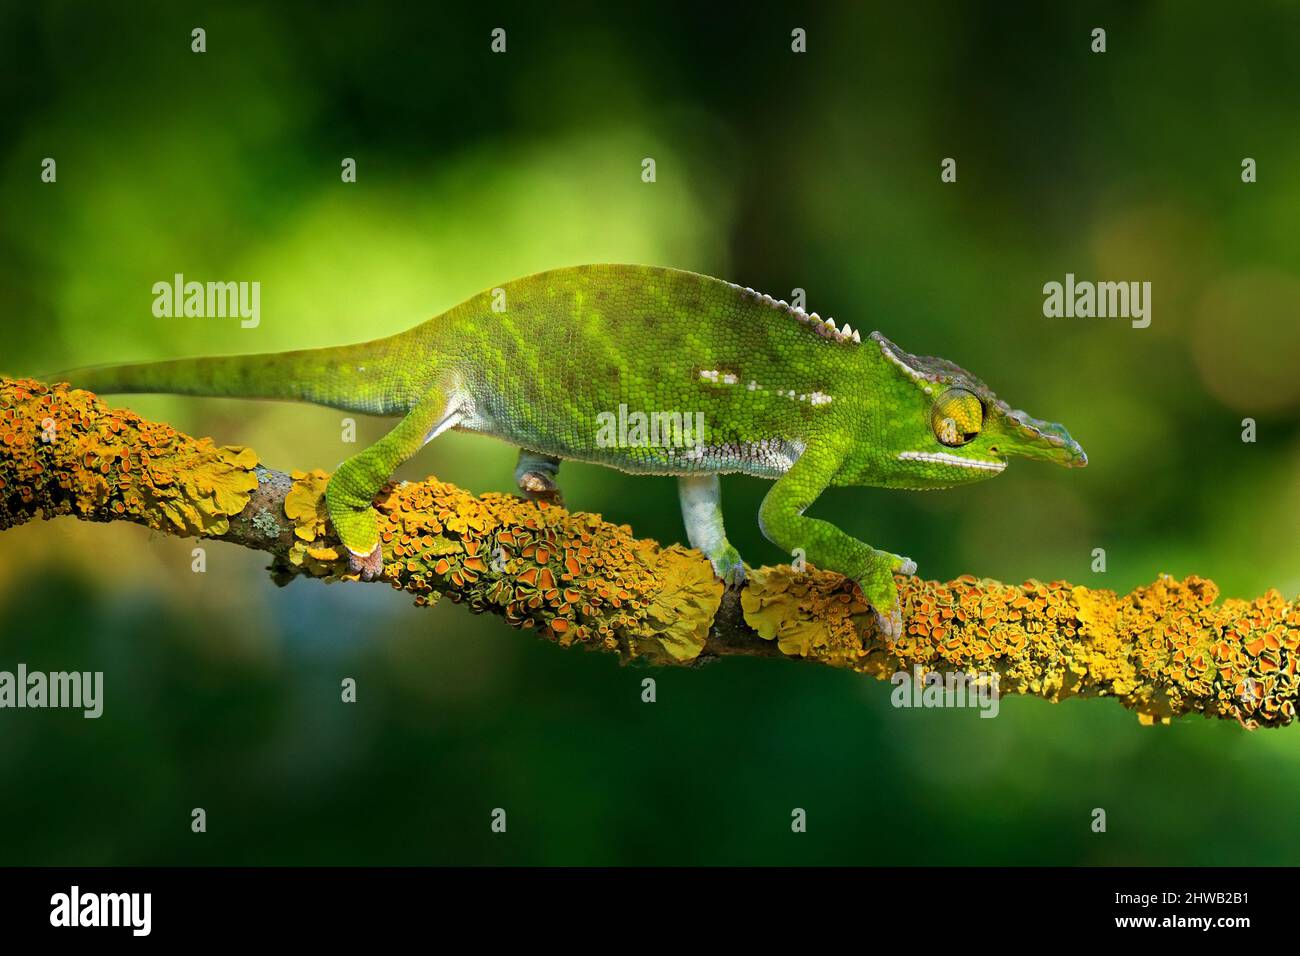 Canopy Wills chameleon, Furcifer willsii, sitting on the branch in forest habitat. Exotic beautiful endemic green reptile with long tail from Madagasc Stock Photo